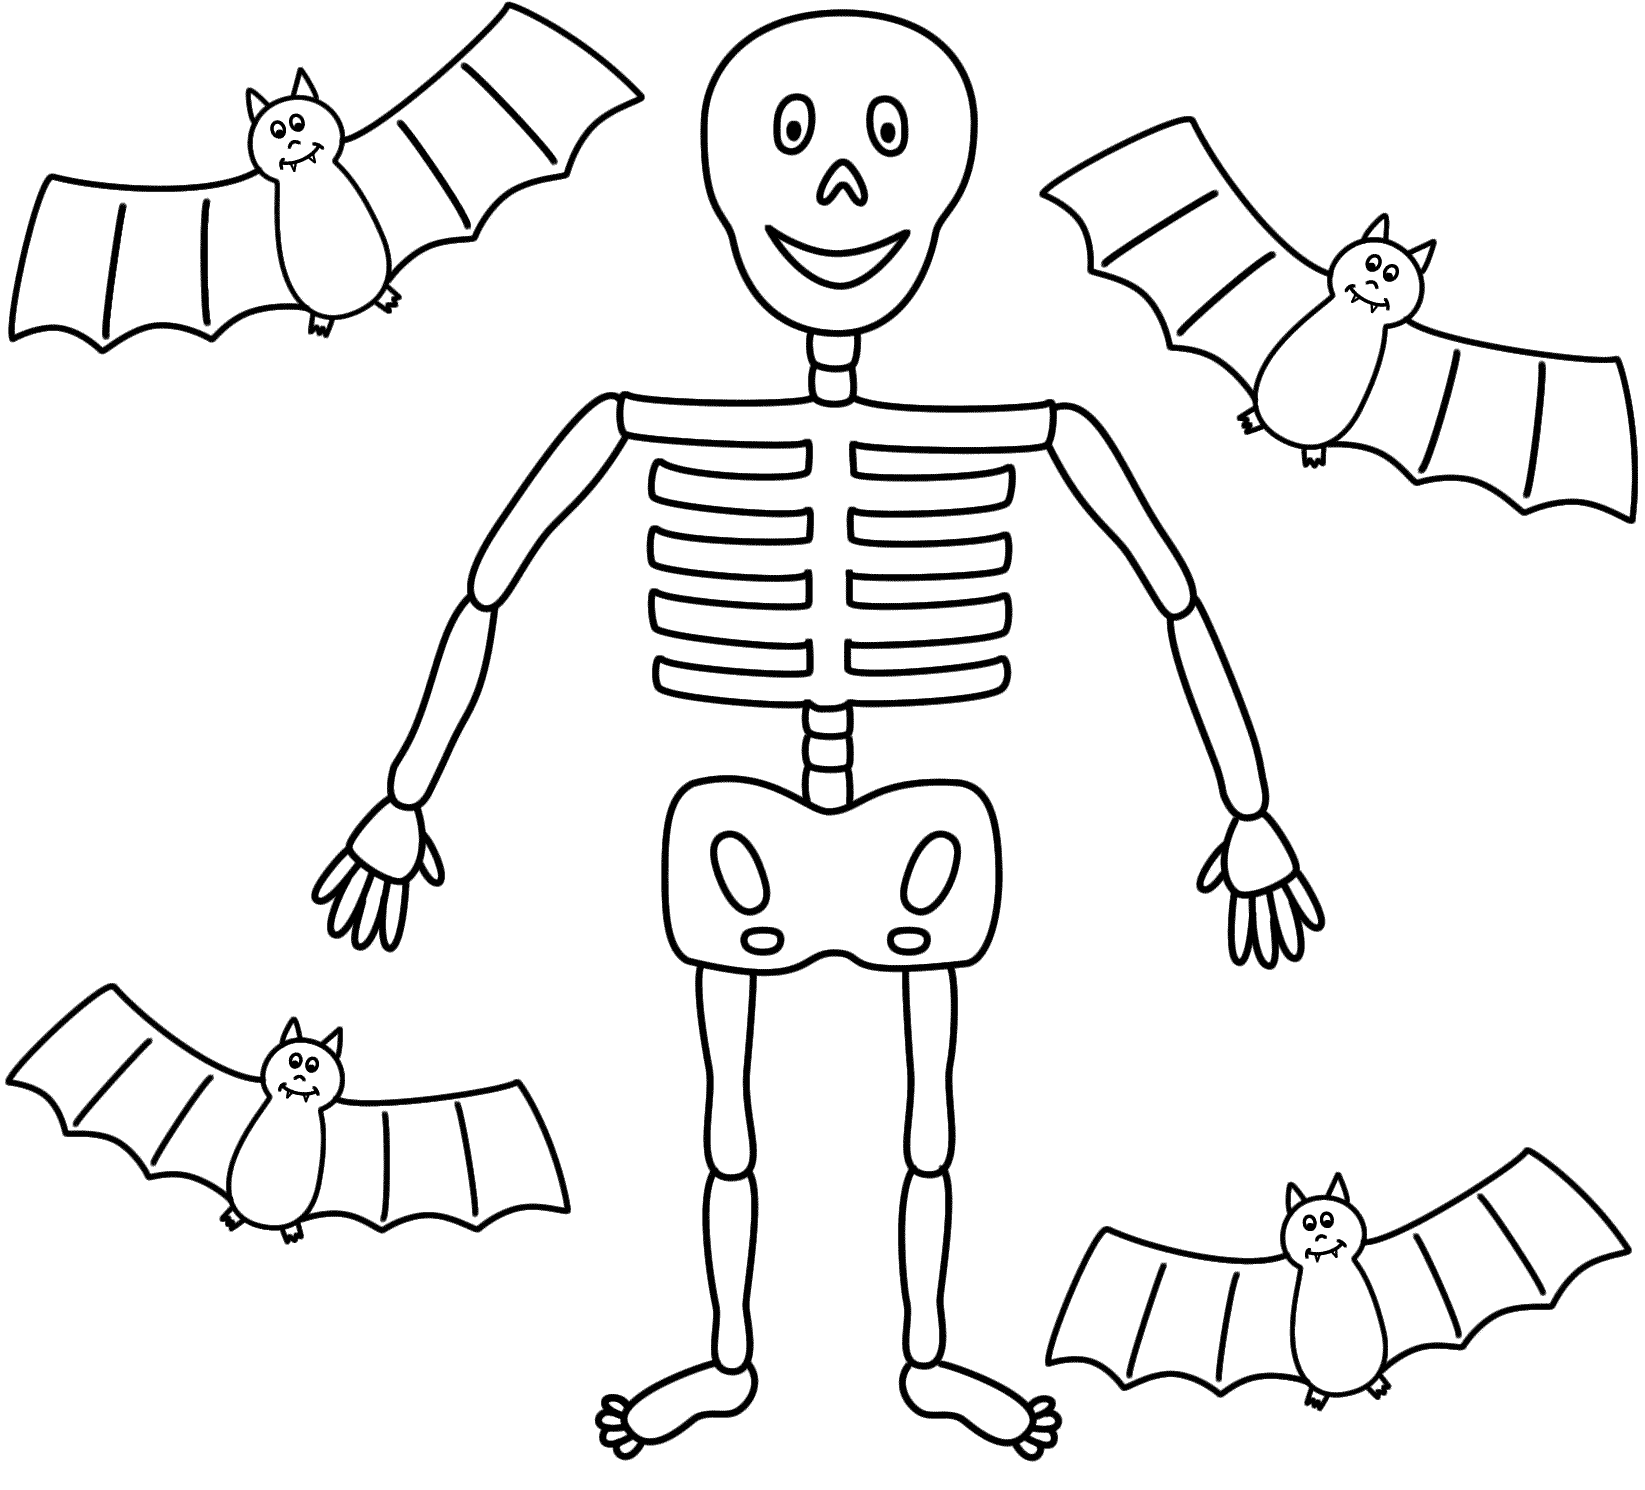 Blank Halloween Coloring Pages 7